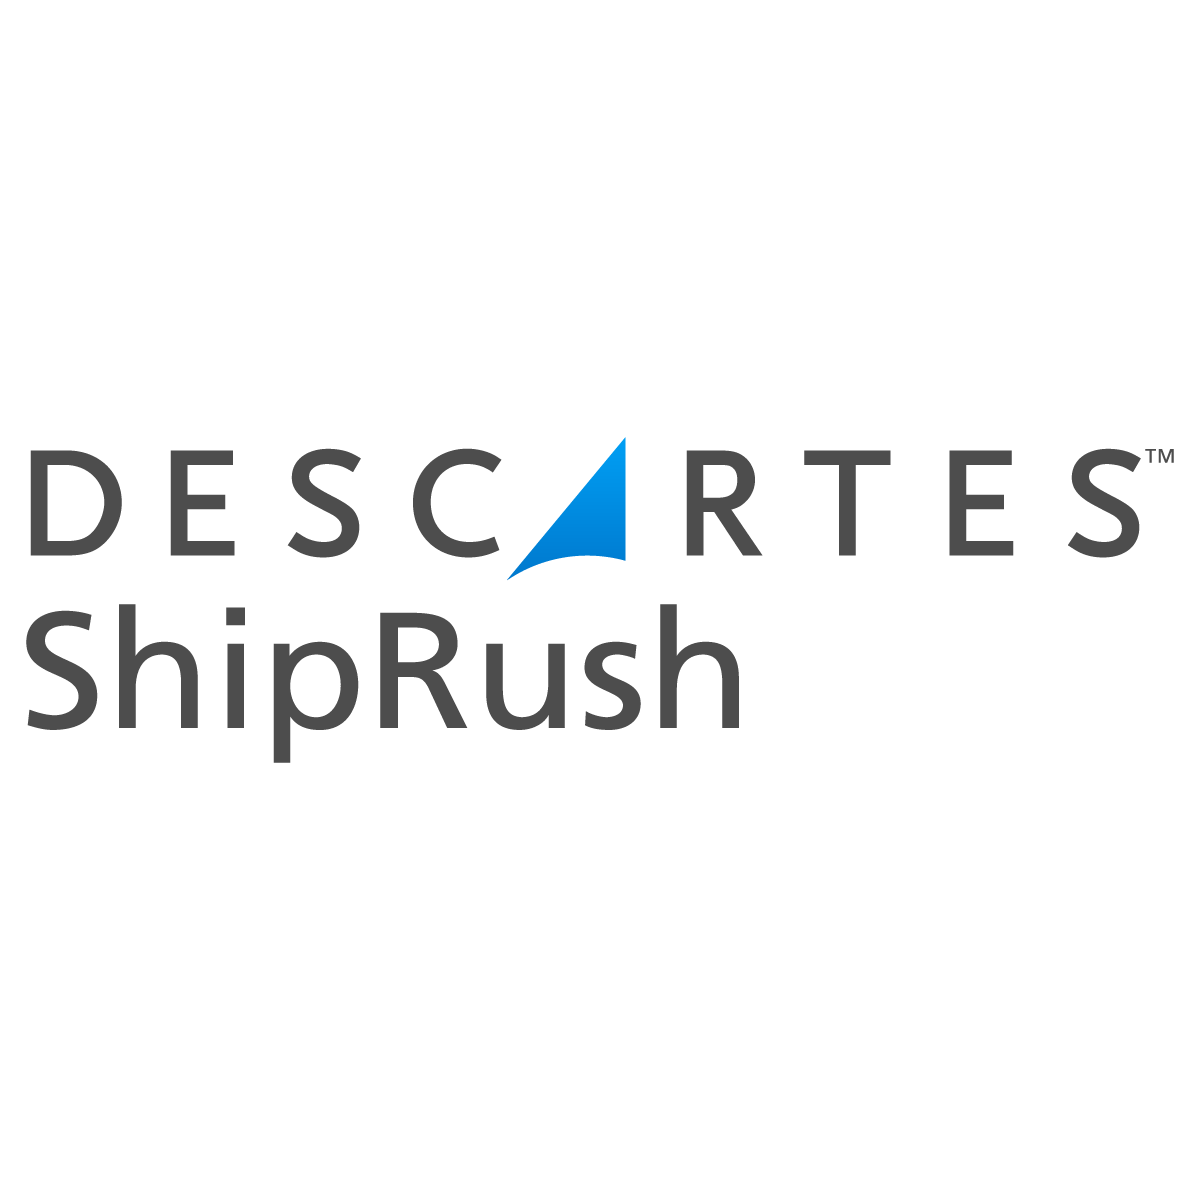 Hire Shopify Experts to integrate Descartes ShipRush app into a Shopify store